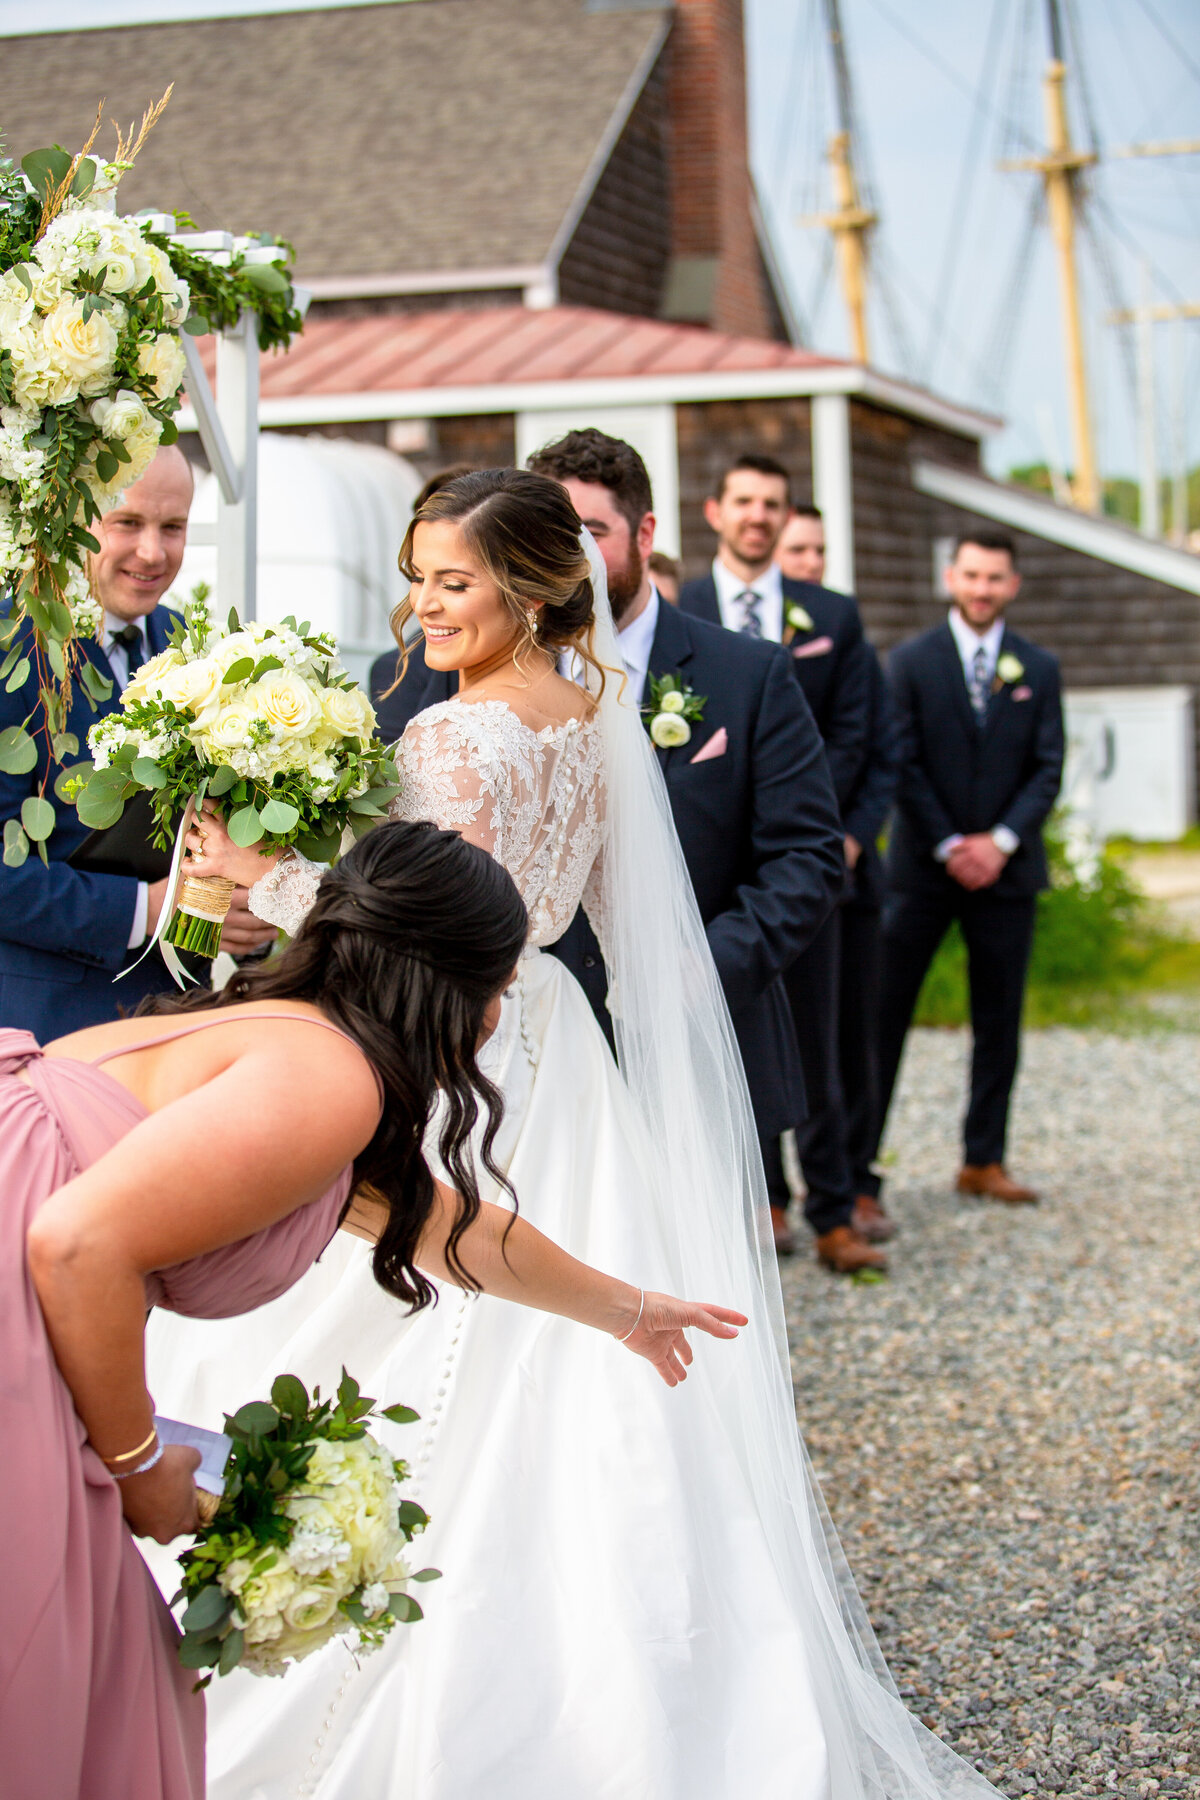 Bride hands her bouquet to her maid of honor during a wedding ceremony at the Mystic Seaport.